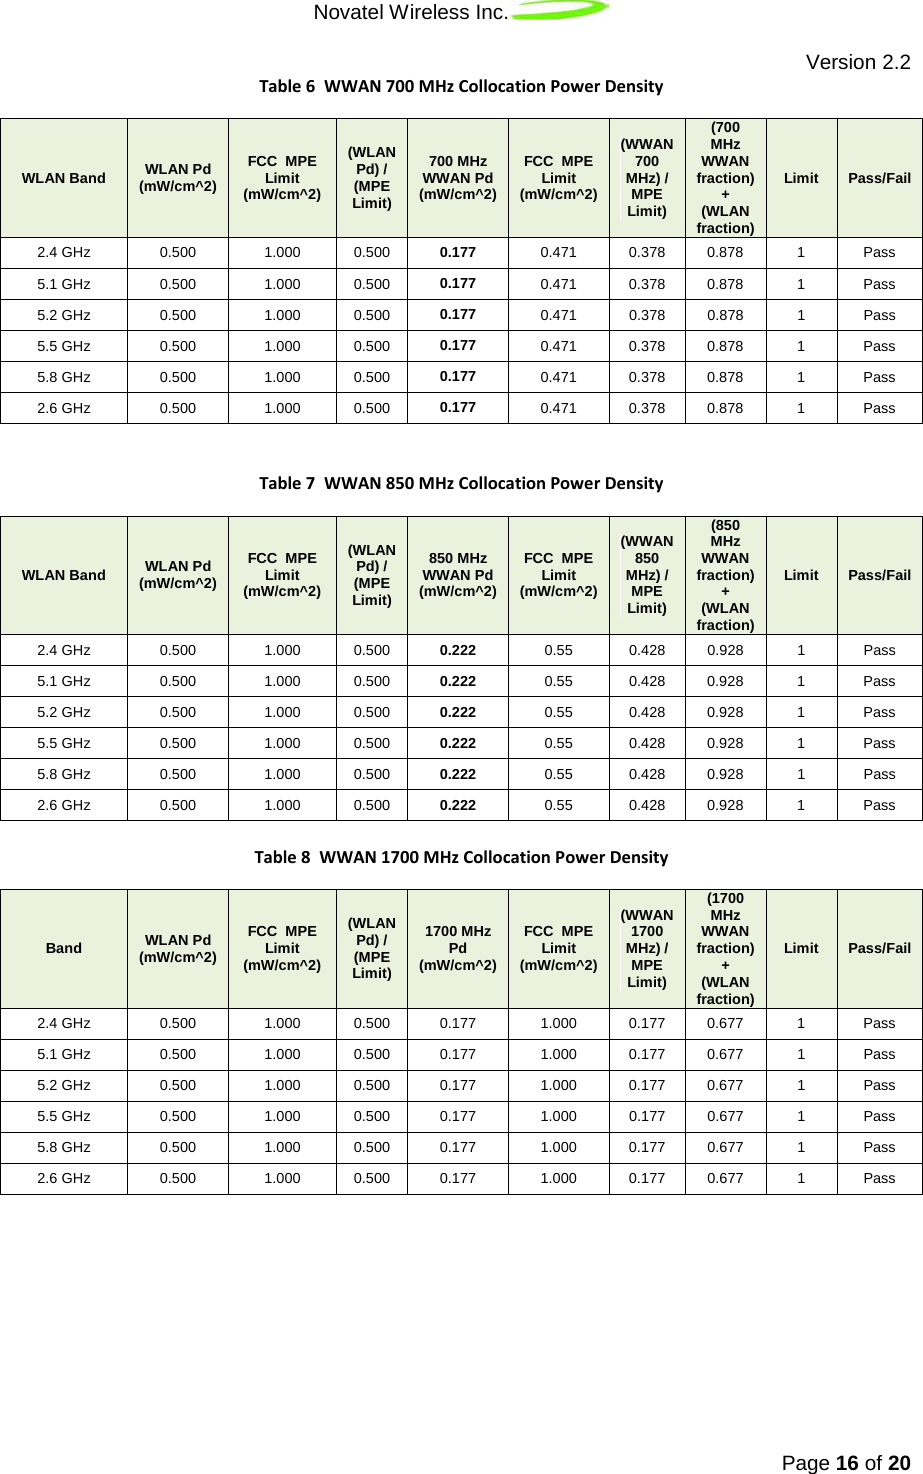 Novatel Wireless Inc.   Version 2.2 Page 16 of 20  Table 6  WWAN 700 MHz Collocation Power Density WLAN Band WLAN Pd  (mW/cm^2) FCC  MPE Limit (mW/cm^2) (WLAN Pd) / (MPE Limit) 700 MHz WWAN Pd  (mW/cm^2) FCC  MPE Limit (mW/cm^2) (WWAN 700 MHz) / MPE Limit) (700 MHz WWAN fraction) + (WLAN fraction) Limit Pass/Fail 2.4 GHz 0.500 1.000 0.500 0.177 0.471 0.378 0.878  1  Pass 5.1 GHz 0.500 1.000 0.500 0.177 0.471 0.378 0.878  1  Pass 5.2 GHz 0.500 1.000 0.500 0.177 0.471 0.378 0.878  1  Pass 5.5 GHz 0.500 1.000 0.500 0.177 0.471 0.378 0.878  1  Pass 5.8 GHz 0.500 1.000 0.500 0.177 0.471 0.378 0.878  1  Pass 2.6 GHz 0.500 1.000 0.500 0.177 0.471 0.378 0.878  1  Pass   Table 7  WWAN 850 MHz Collocation Power Density WLAN Band WLAN Pd  (mW/cm^2) FCC  MPE Limit (mW/cm^2) (WLAN Pd) / (MPE Limit) 850 MHz WWAN Pd  (mW/cm^2) FCC  MPE Limit (mW/cm^2) (WWAN 850 MHz) / MPE Limit) (850 MHz WWAN fraction) + (WLAN fraction) Limit Pass/Fail 2.4 GHz 0.500 1.000 0.500 0.222 0.55  0.428 0.928  1  Pass 5.1 GHz 0.500 1.000 0.500 0.222 0.55 0.428 0.928  1  Pass 5.2 GHz 0.500 1.000 0.500 0.222 0.55 0.428 0.928  1  Pass 5.5 GHz 0.500 1.000 0.500 0.222 0.55 0.428 0.928  1  Pass 5.8 GHz 0.500 1.000 0.500 0.222 0.55 0.428 0.928  1  Pass 2.6 GHz 0.500 1.000 0.500 0.222 0.55 0.428 0.928  1  Pass  Table 8  WWAN 1700 MHz Collocation Power Density Band WLAN Pd  (mW/cm^2) FCC  MPE Limit (mW/cm^2) (WLAN Pd) / (MPE Limit) 1700 MHz Pd  (mW/cm^2) FCC  MPE Limit (mW/cm^2) (WWAN 1700 MHz) / MPE Limit) (1700 MHz WWAN fraction) + (WLAN fraction) Limit Pass/Fail 2.4 GHz 0.500 1.000 0.500 0.177 1.000 0.177 0.677  1  Pass 5.1 GHz 0.500 1.000 0.500 0.177 1.000 0.177 0.677 1  Pass 5.2 GHz 0.500 1.000 0.500 0.177 1.000 0.177 0.677 1  Pass 5.5 GHz  0.500 1.000 0.500 0.177 1.000 0.177 0.677 1  Pass 5.8 GHz 0.500 1.000 0.500 0.177 1.000 0.177 0.677 1  Pass 2.6 GHz 0.500 1.000 0.500 0.177 1.000 0.177 0.677 1  Pass  